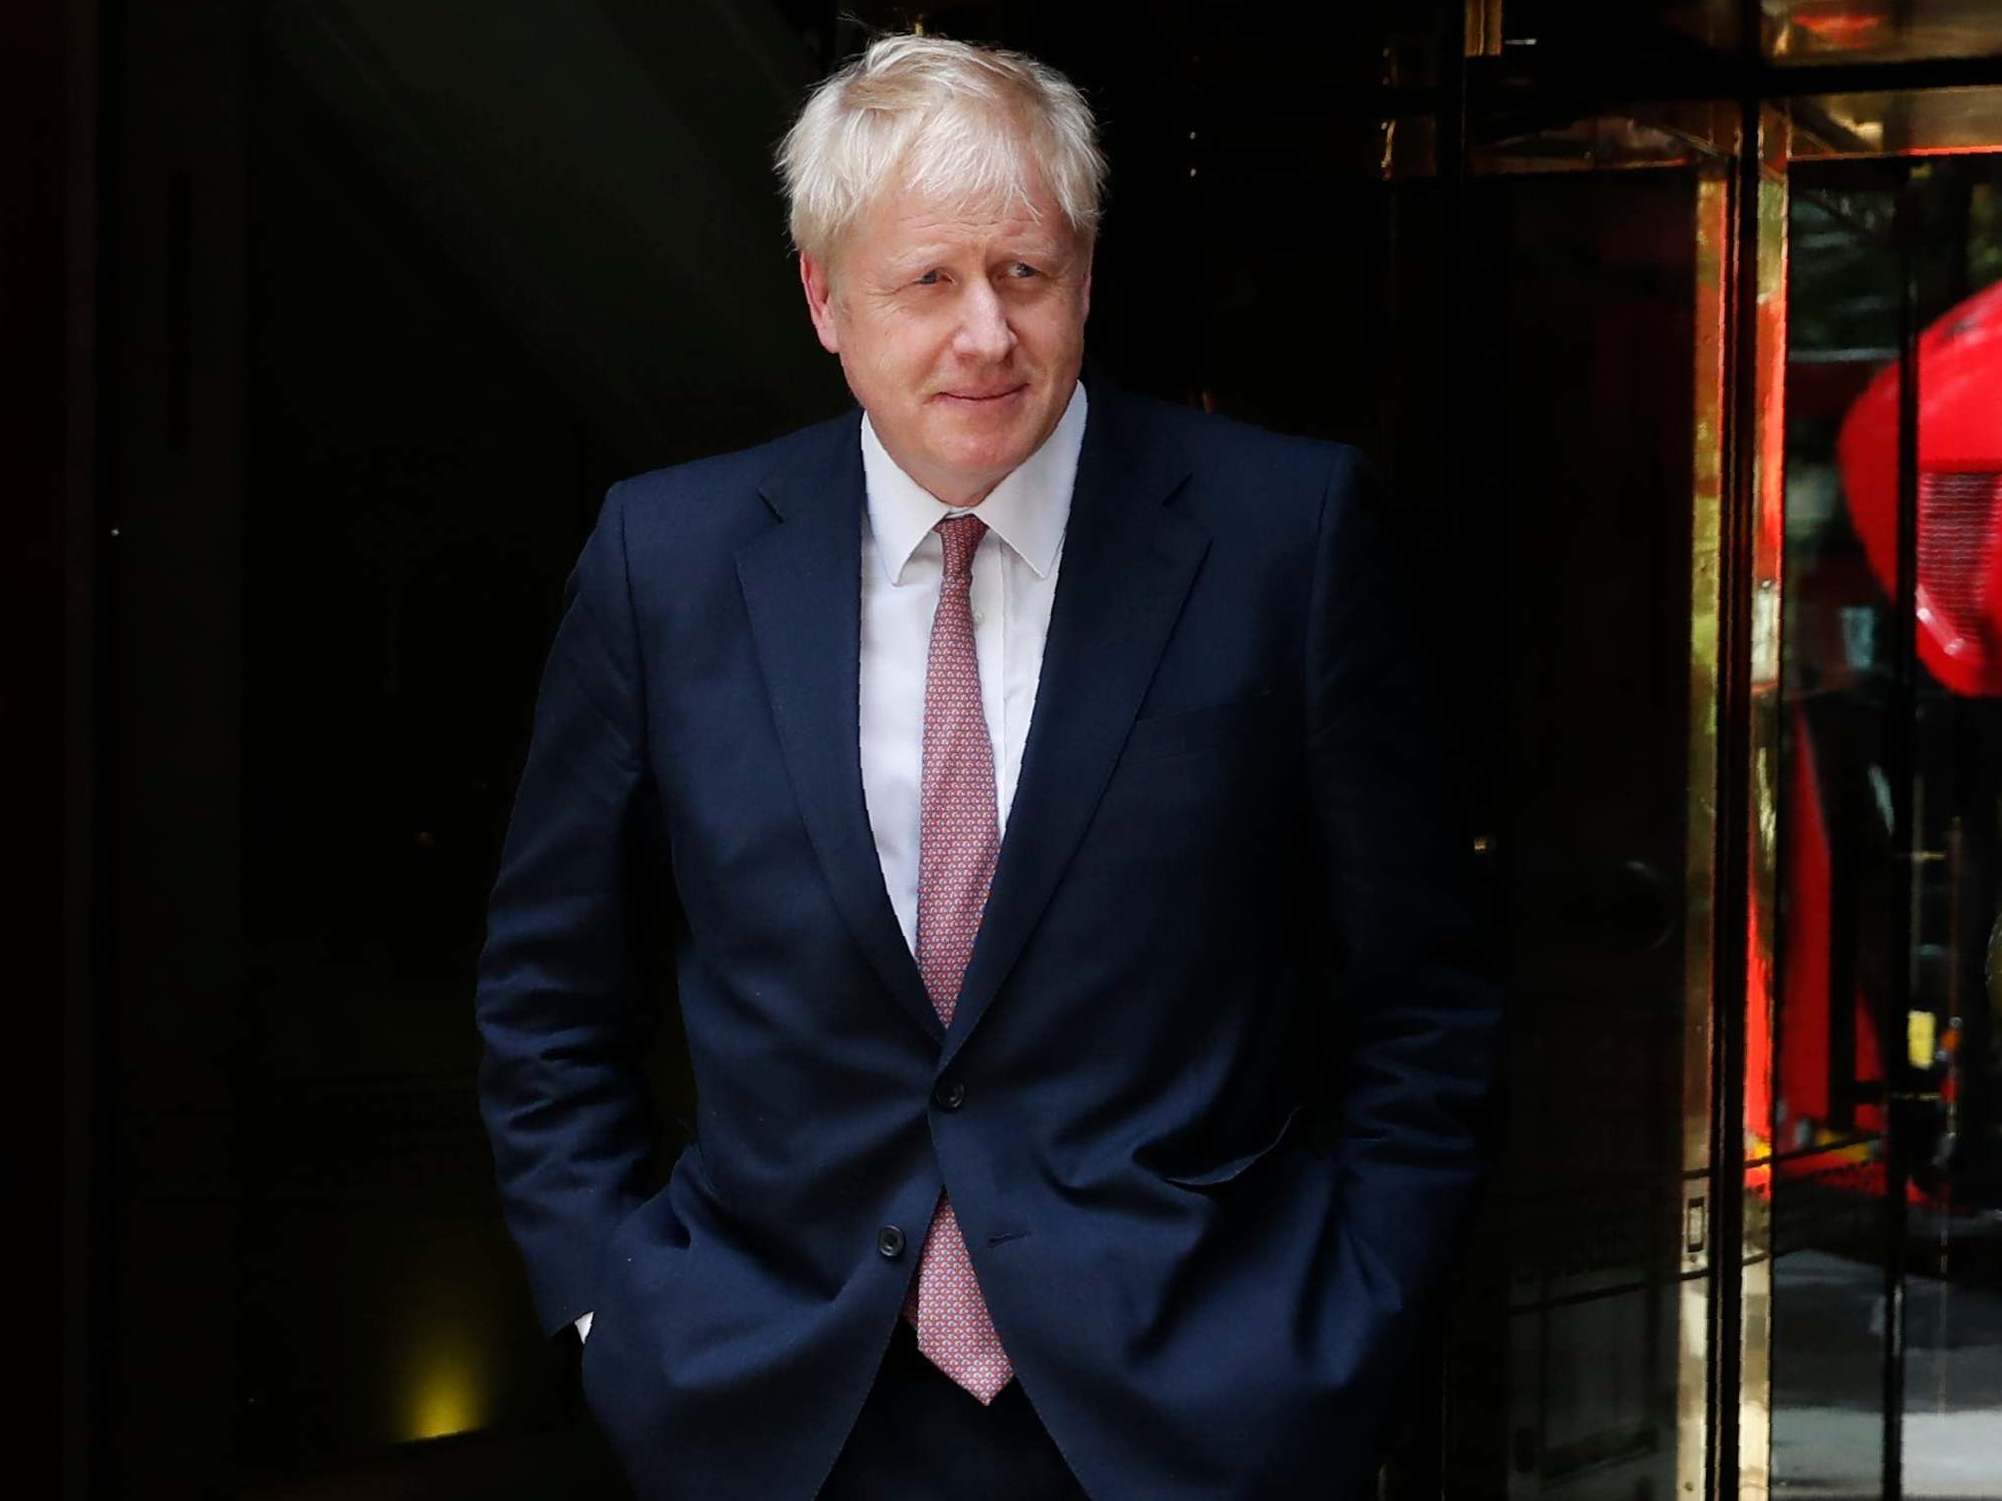 Boris Johnson under fire over unworkable Brexit plan and for being 'hostage to Nigel Farage'